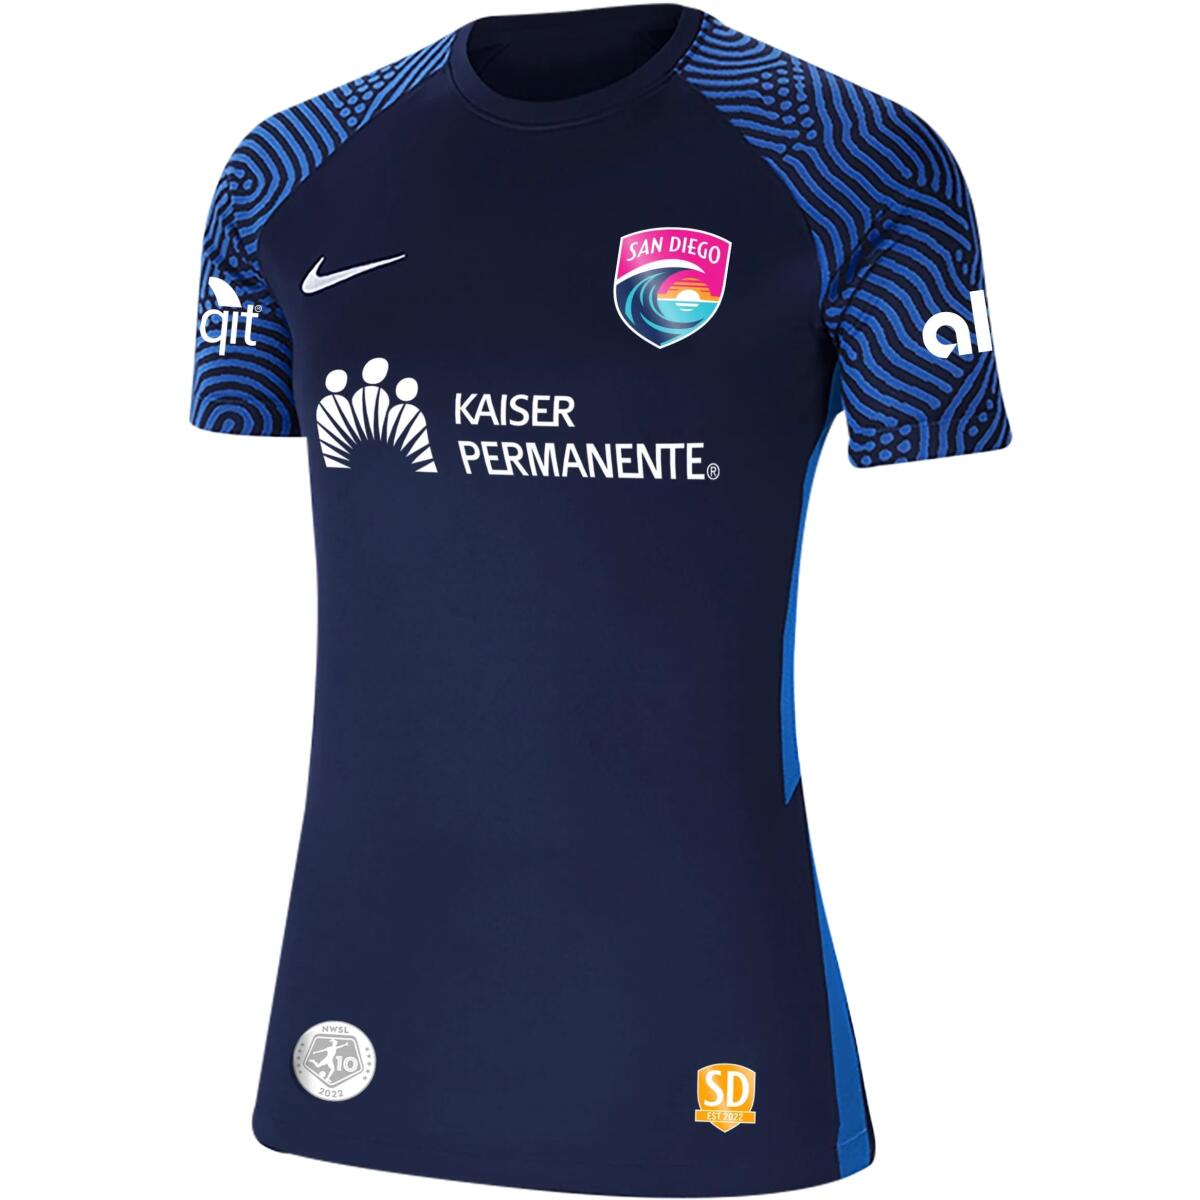 2022 San Diego Wave FC Home Jersey, featuring crest over the heart and team colors navy blue and light blue.